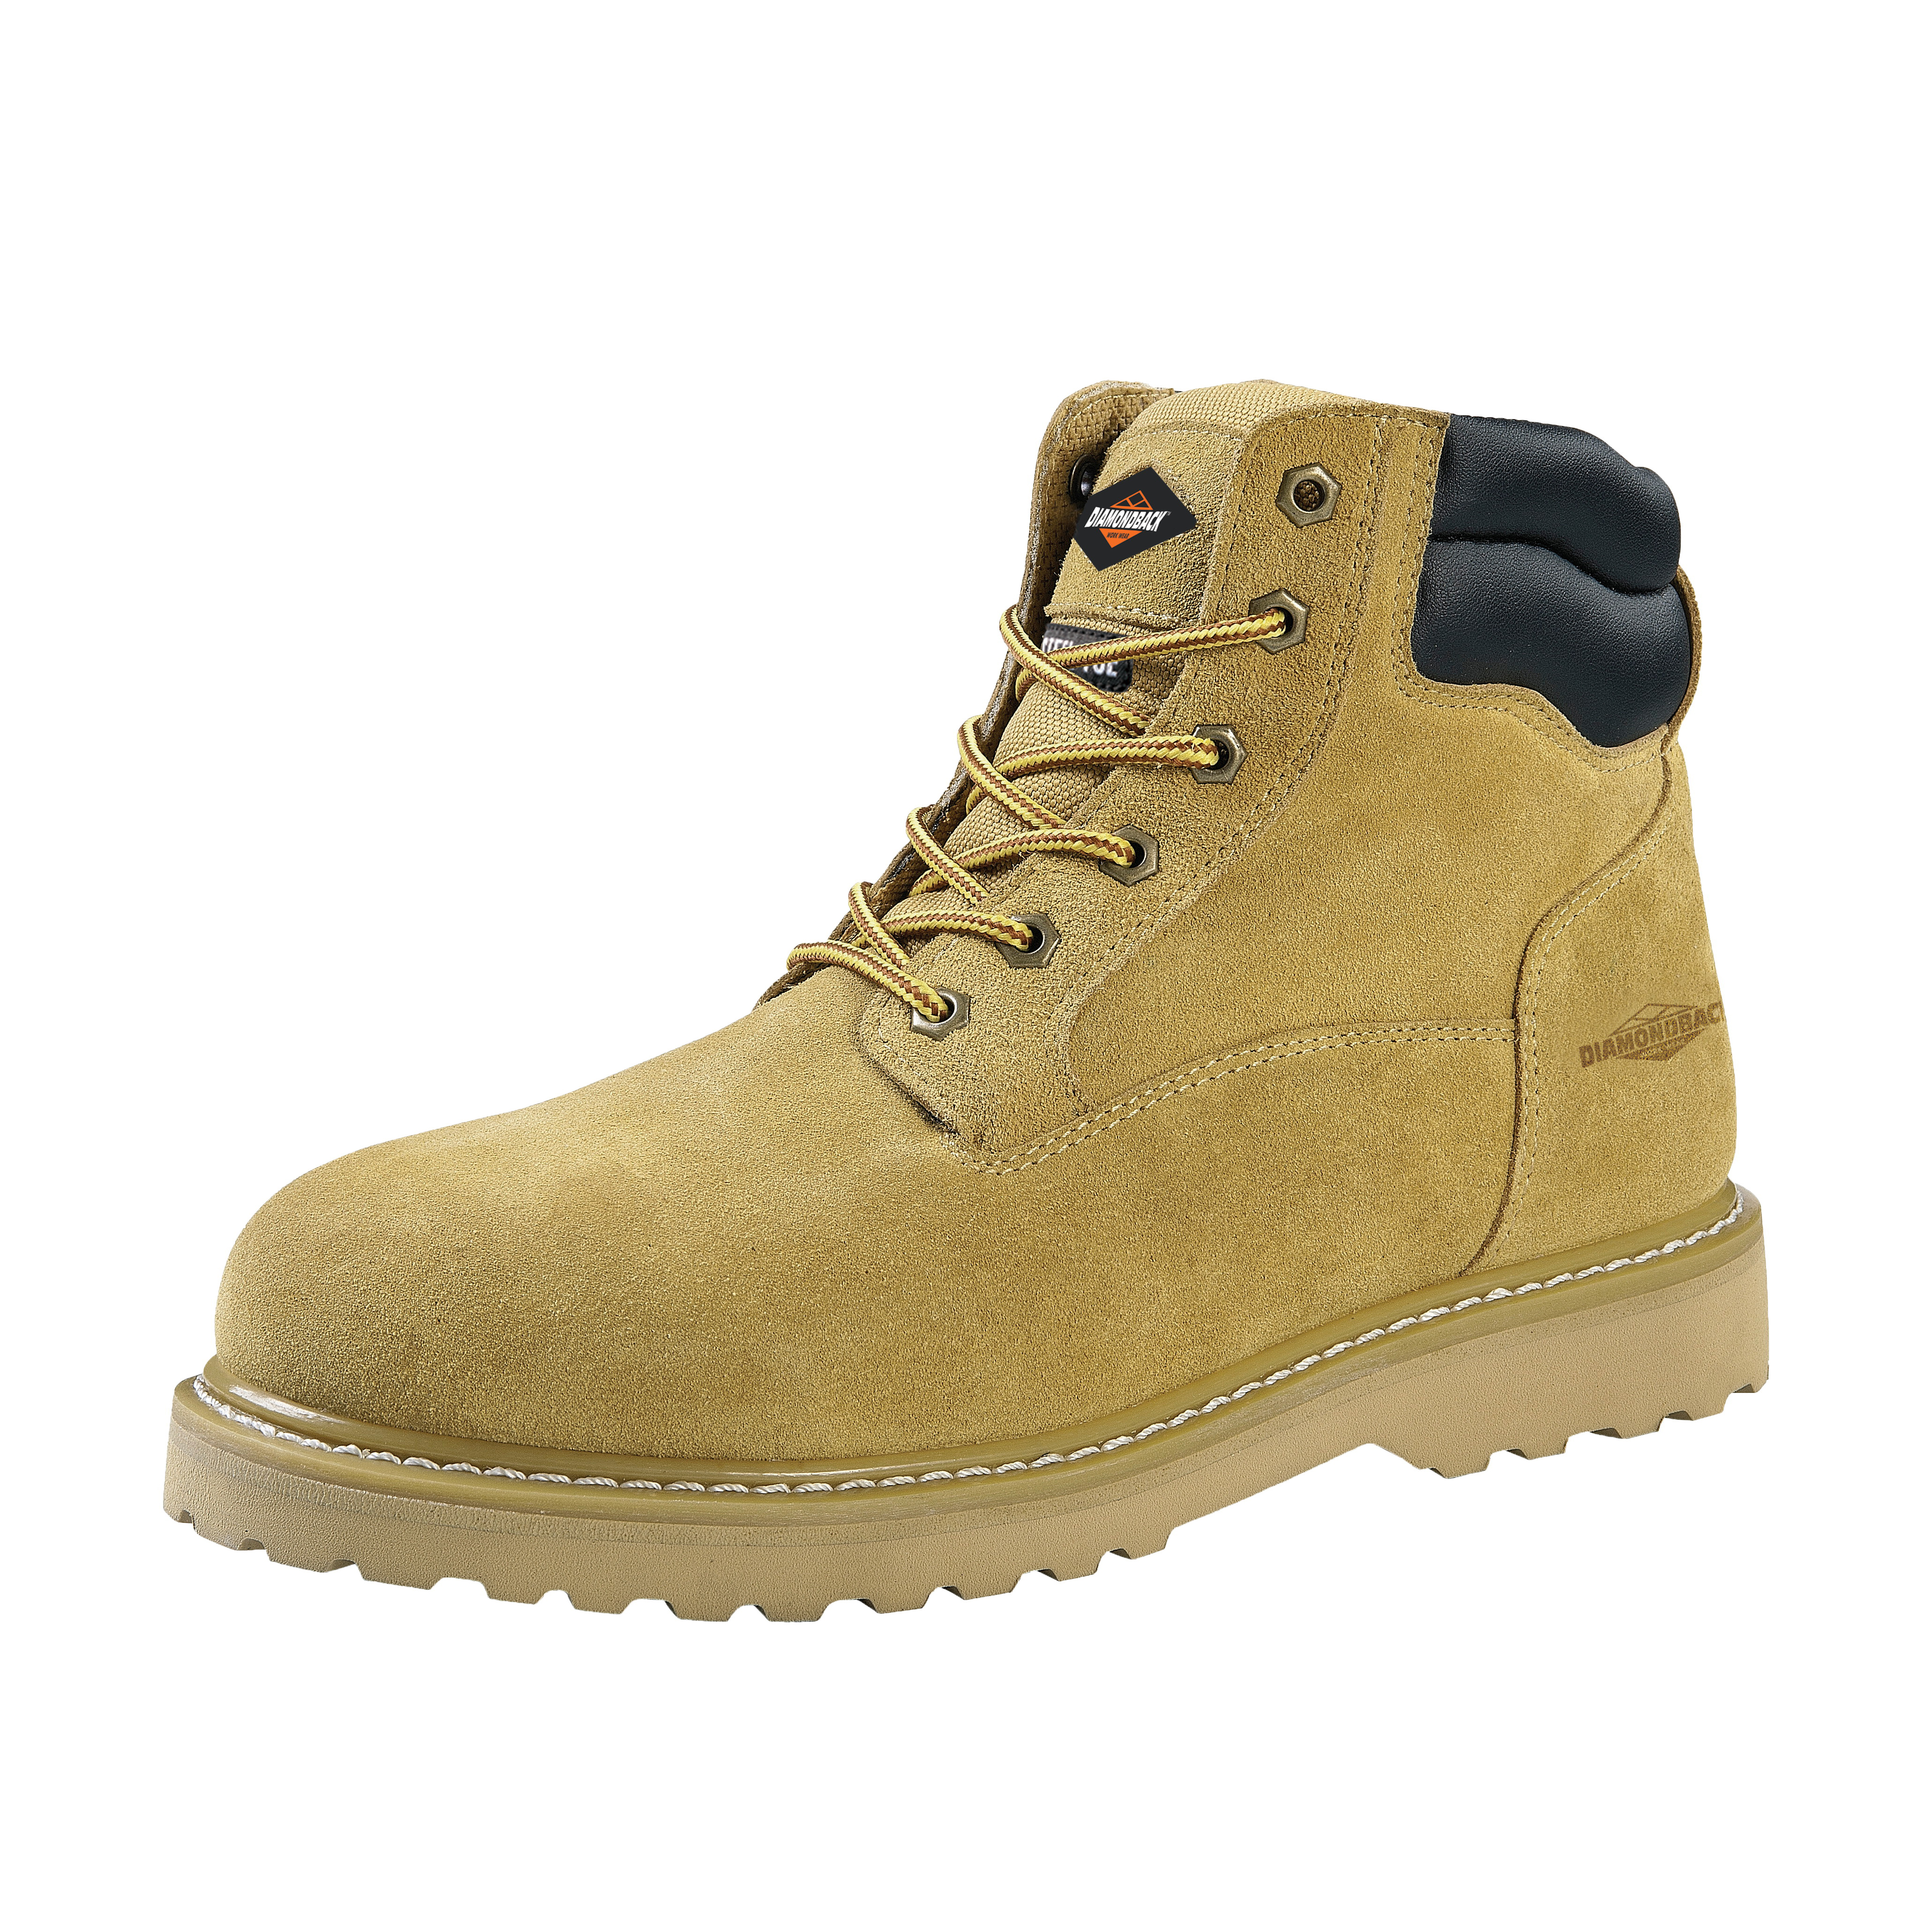 Work Boots, 10.5, Extra Wide W, Tan, Suede Leather Upper, Lace-Up Closure, With Lining